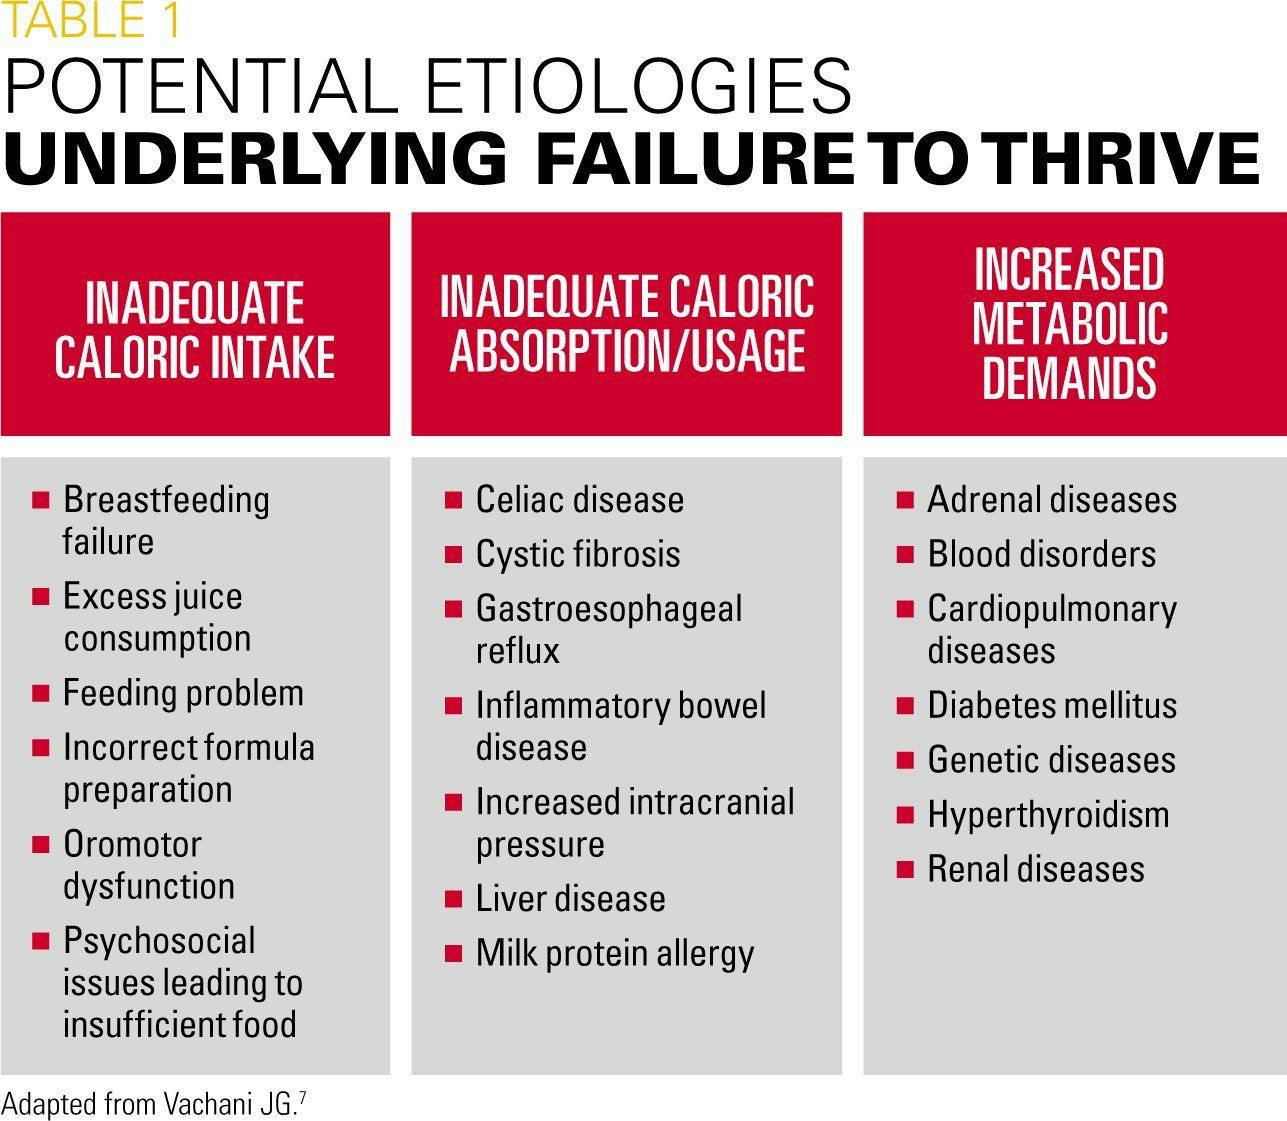 Potential etiologies underlying failure to thrive